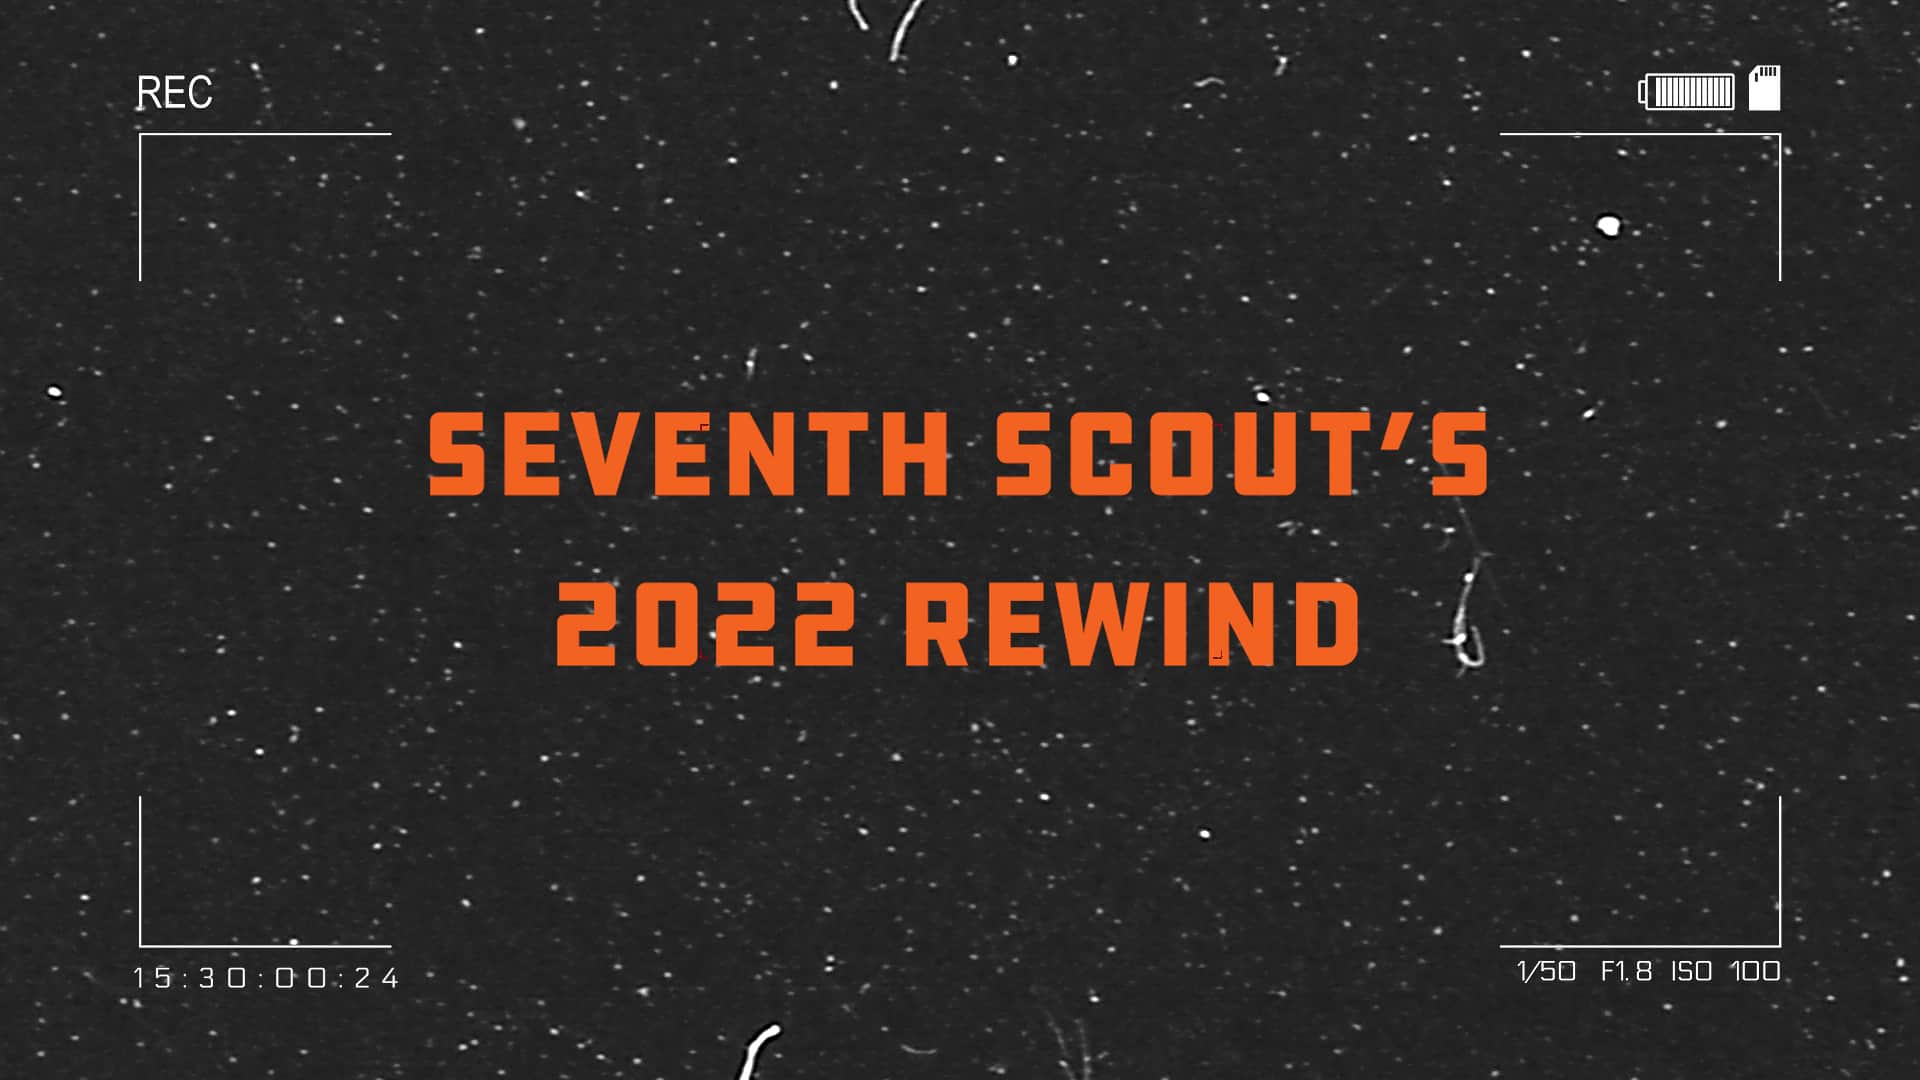 Seventh Scout's 2022 Rewind Video Still - Featured Image